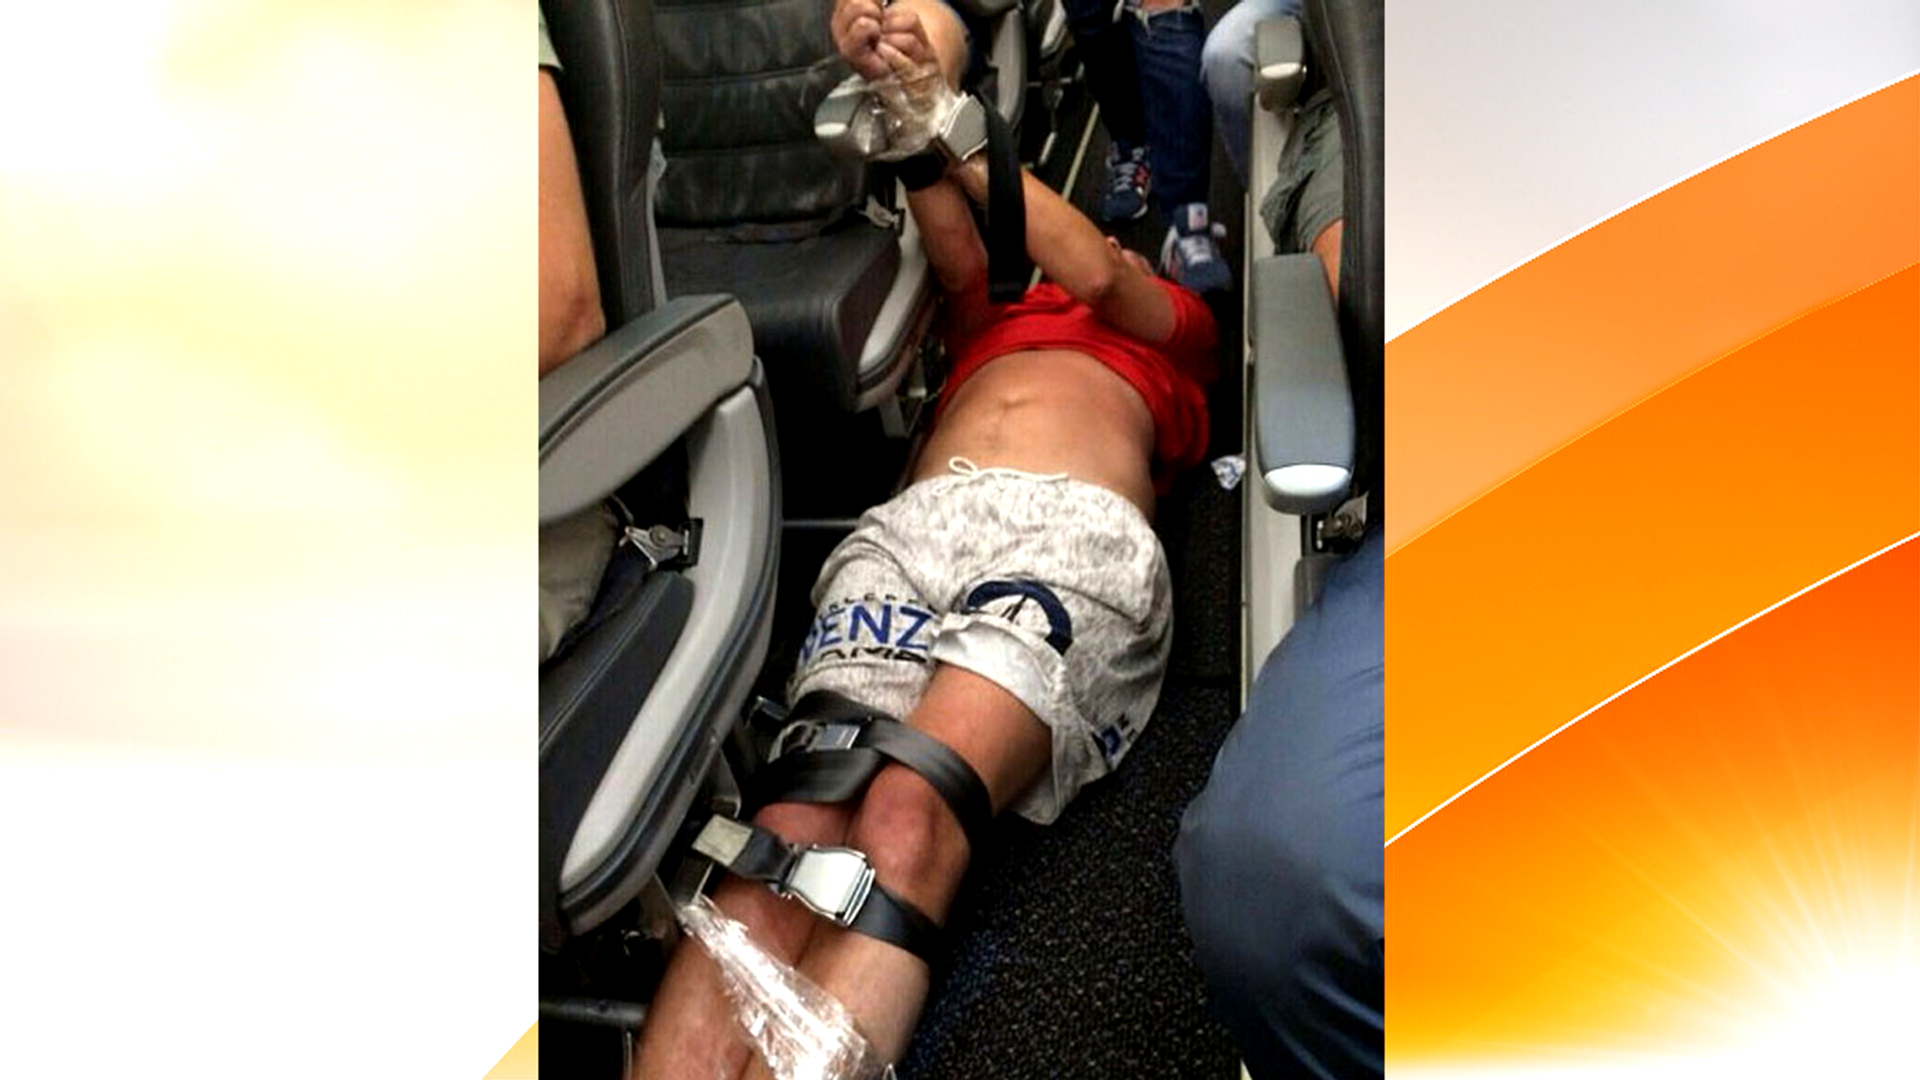 Watch: Unruly plane passenger tackled, tied up with seat belts.